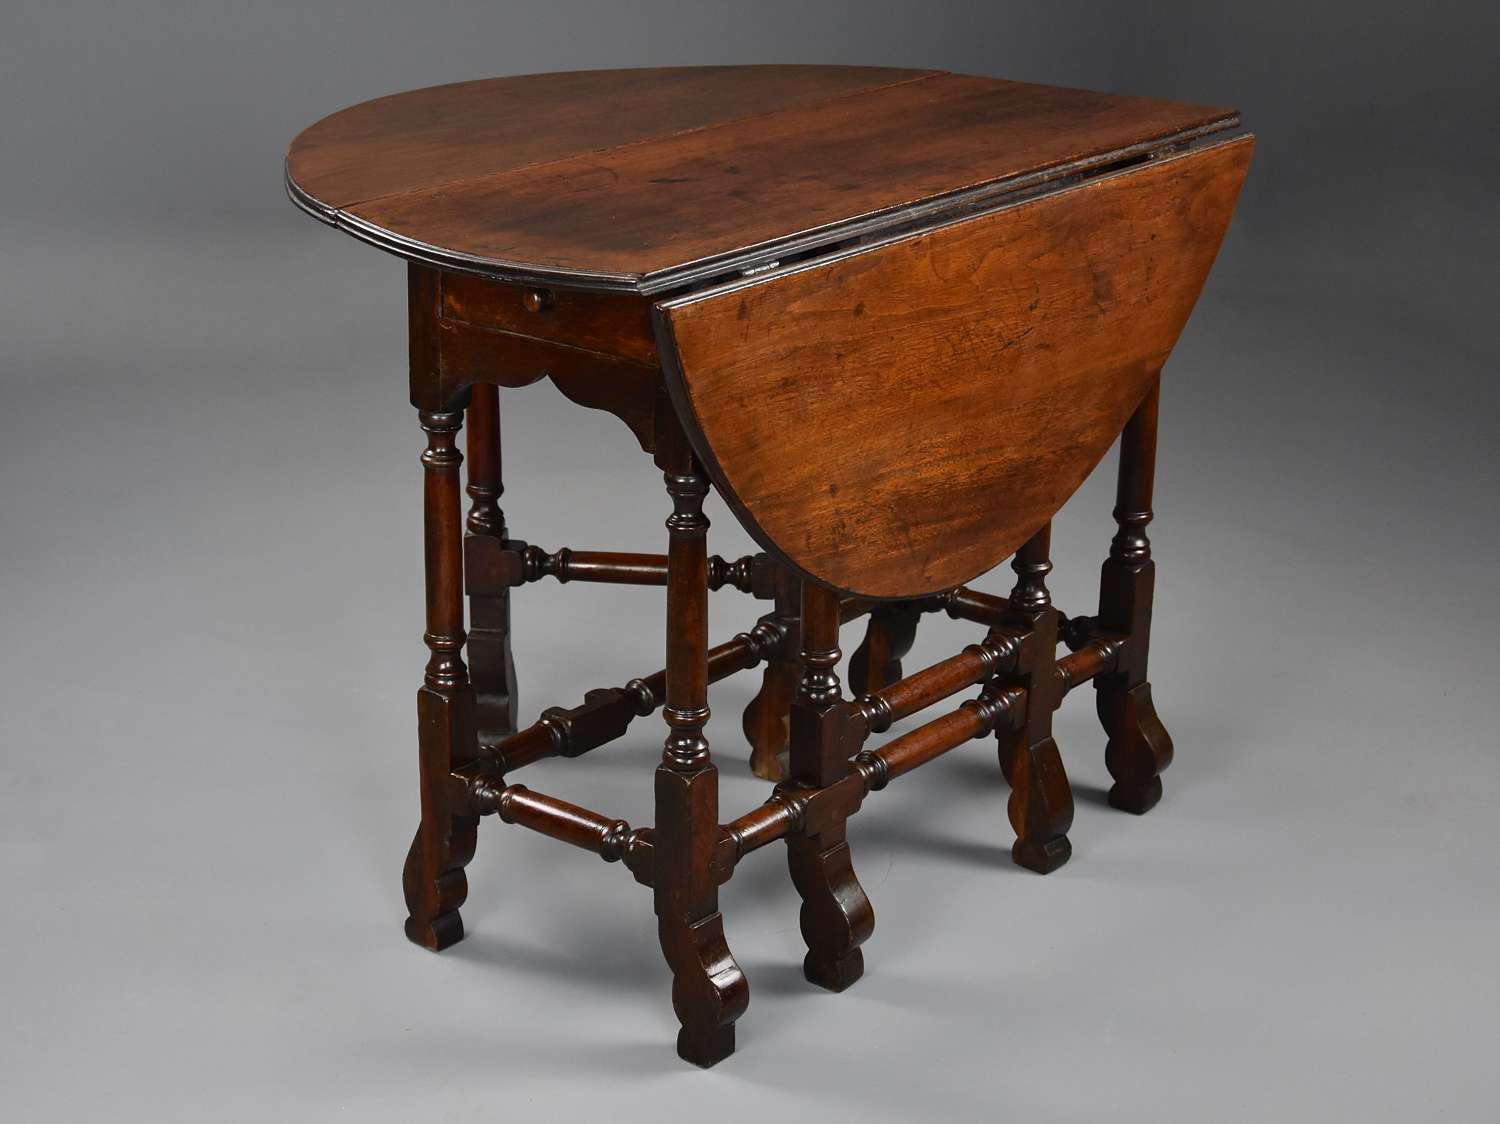 Rare 18thc red walnut gateleg table of small proportions & fine patina